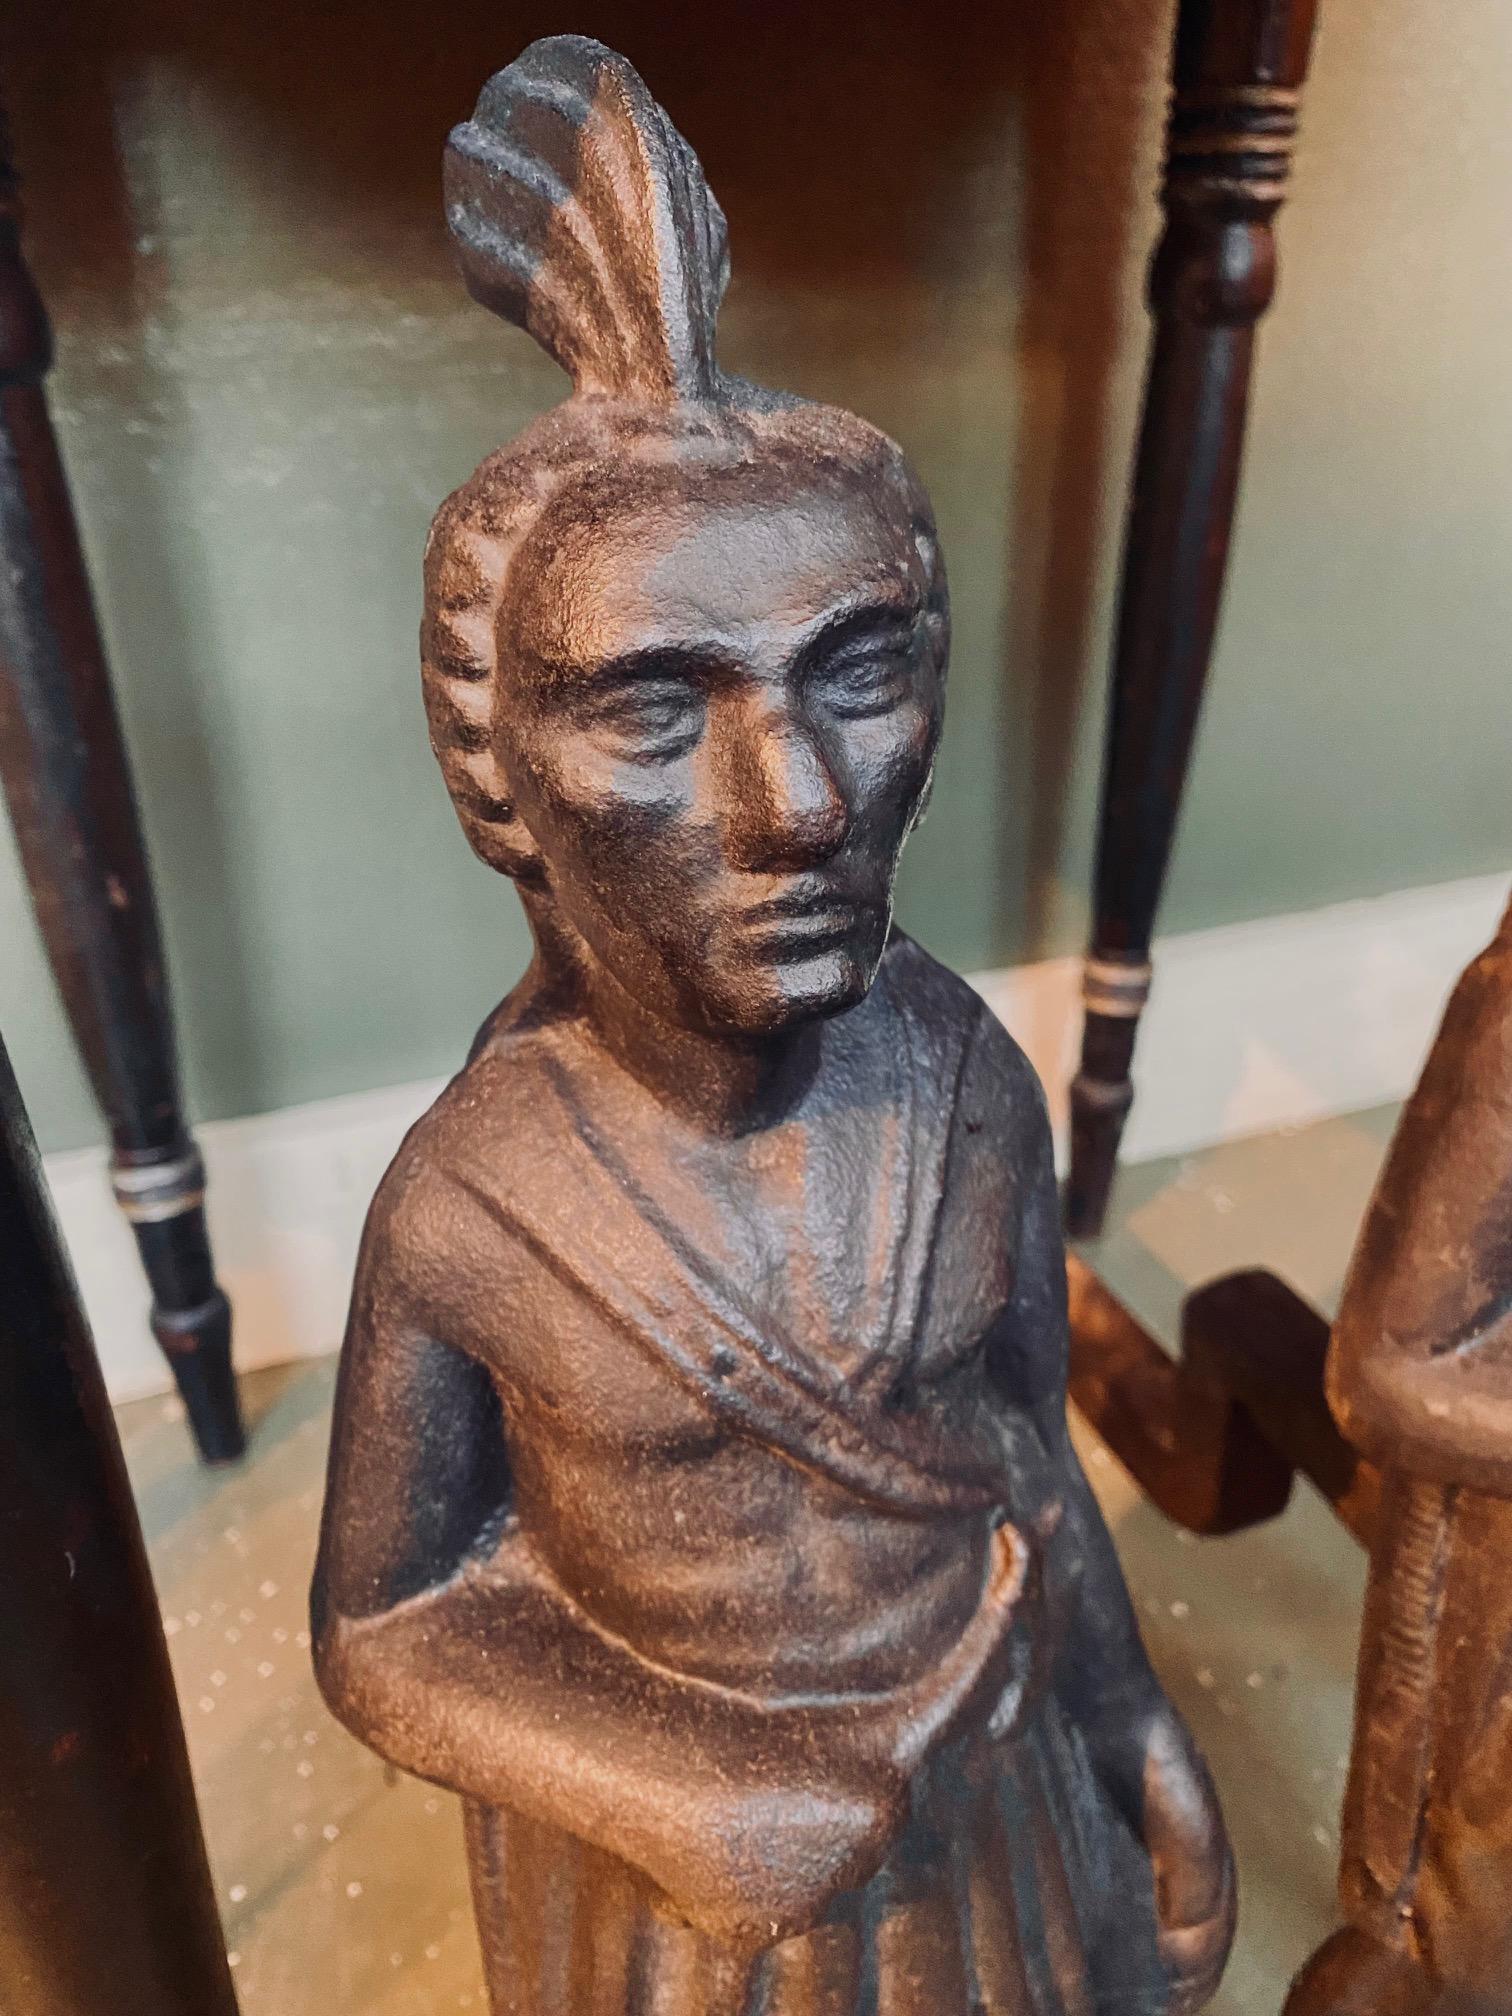 19th Century Pair of Cast Iron Native American Andirons, circa 1880, very scarce andirons depicting Massasoit, the Sachem of the Wampanoag Confederacy, who met and befriended the Pilgrims of the Plymouth Plantation. The figure is shown wearing a